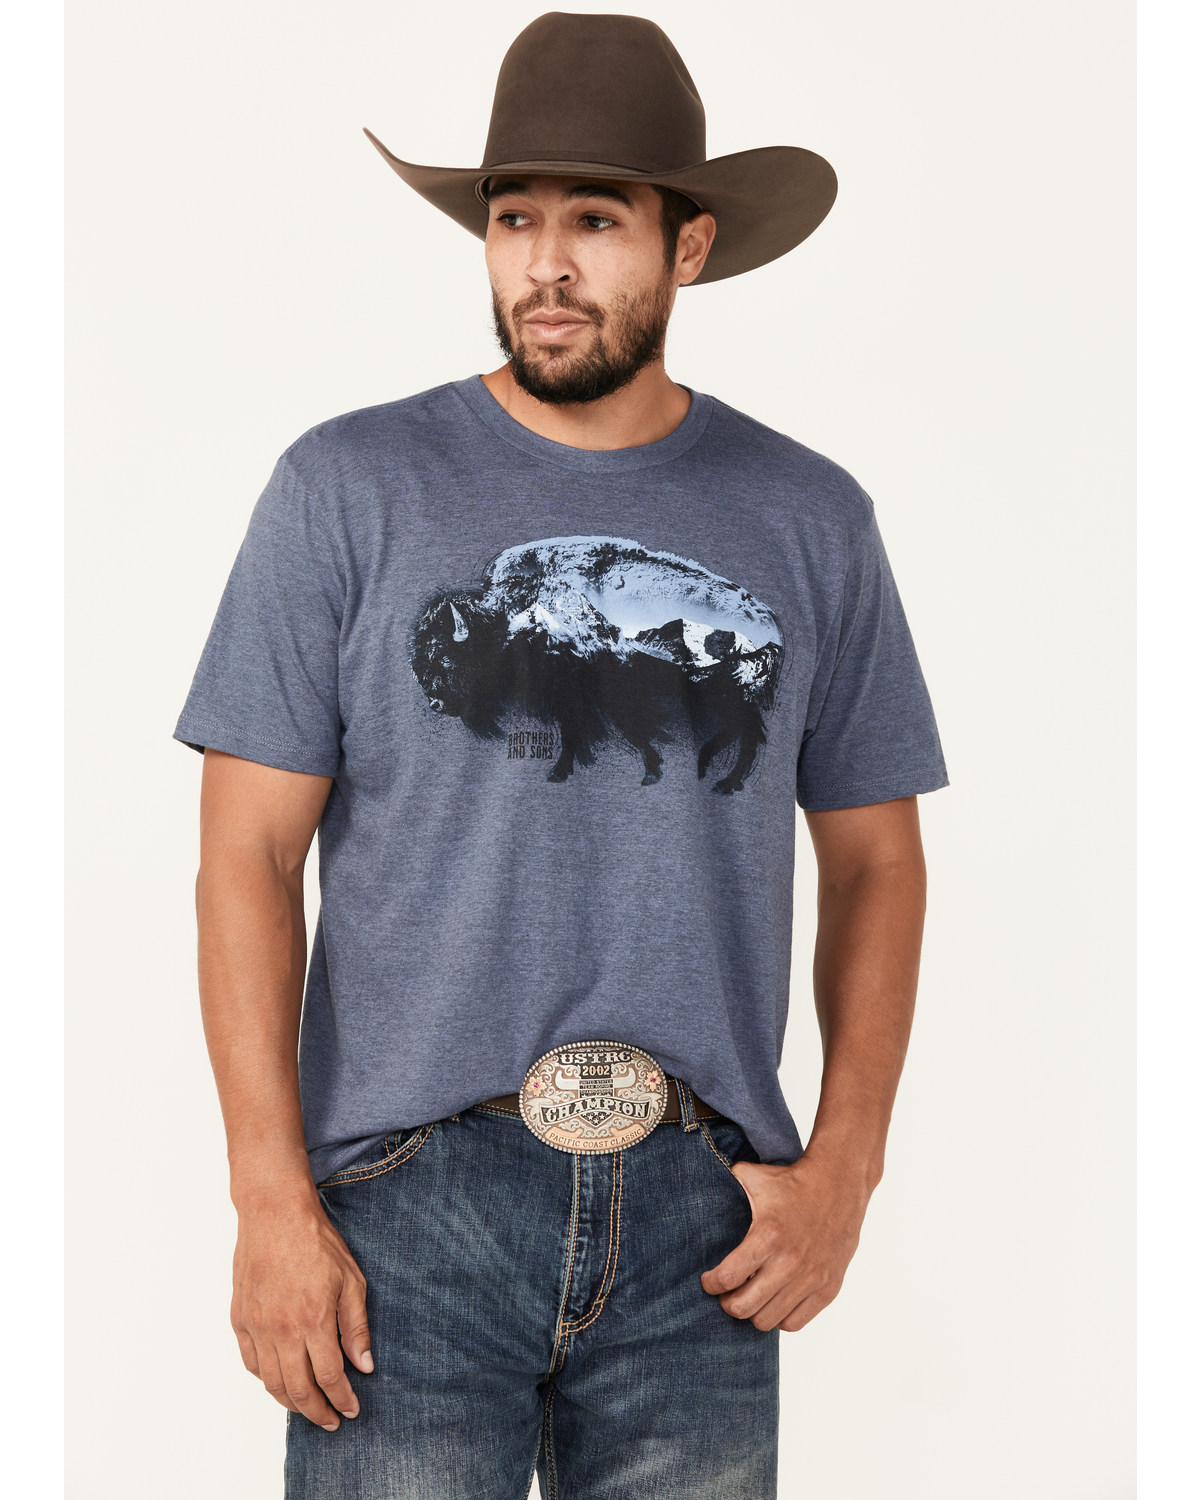 Brothers and Sons Men's Bison Short Sleeve Graphic T-Shirt